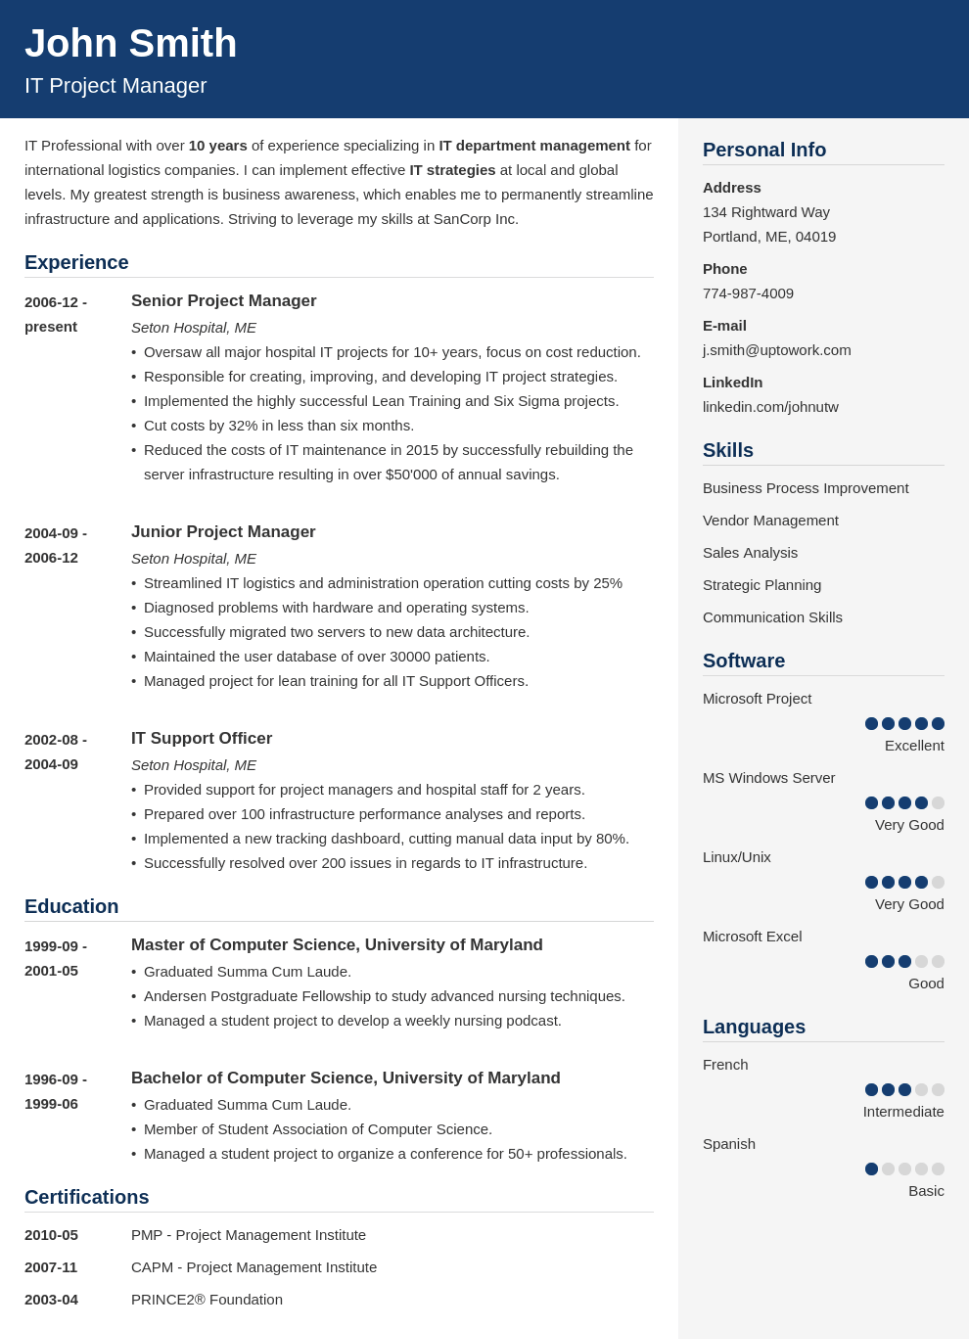 Example of a resume